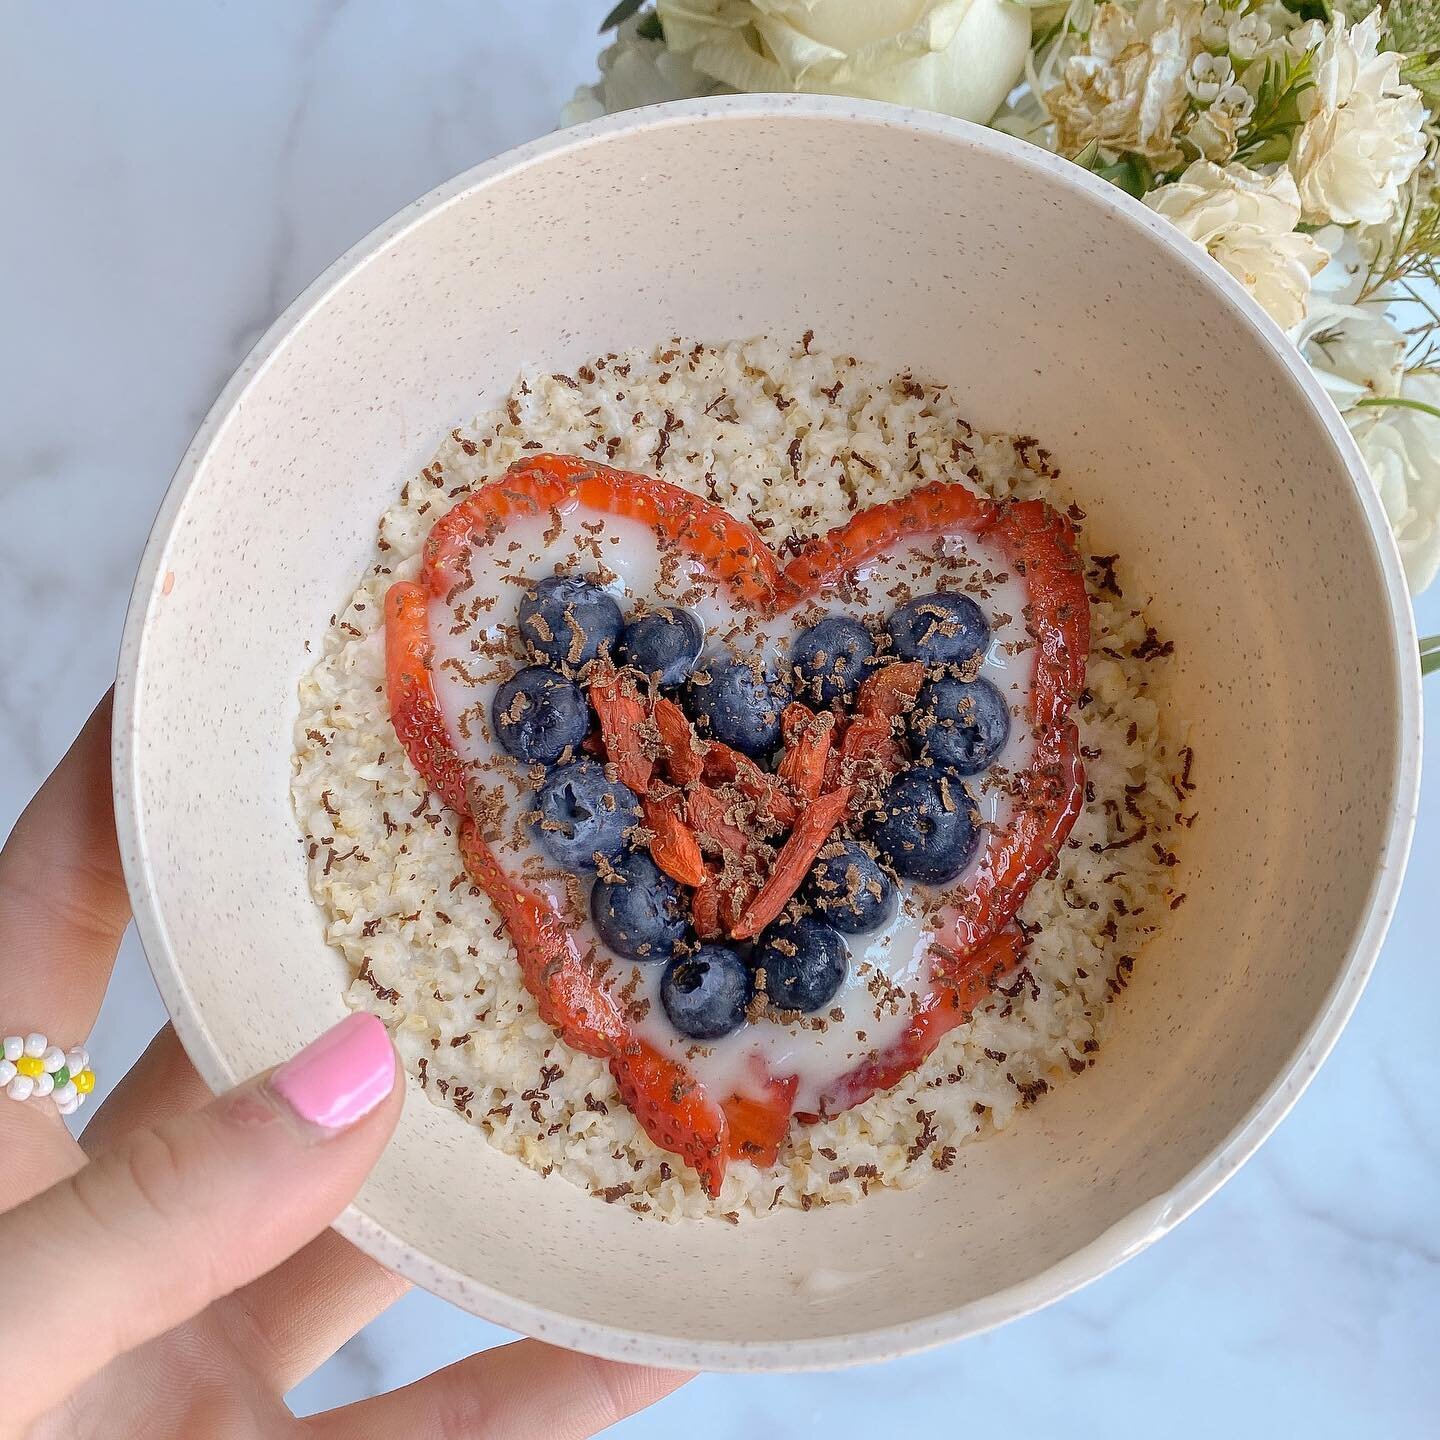 summer giveaway alert!🌞💐⠀[NOW CLOSED]
⠀
@thebowladdict + i have teamed up to give you our bowl essentials for this fourth of july! 🇺🇸⠀
⠀
we are giving away: ⠀
⠀
- a 50$ @traderjoes giftcard (🤯) to buy all of your favorite fresh fruits + toppings